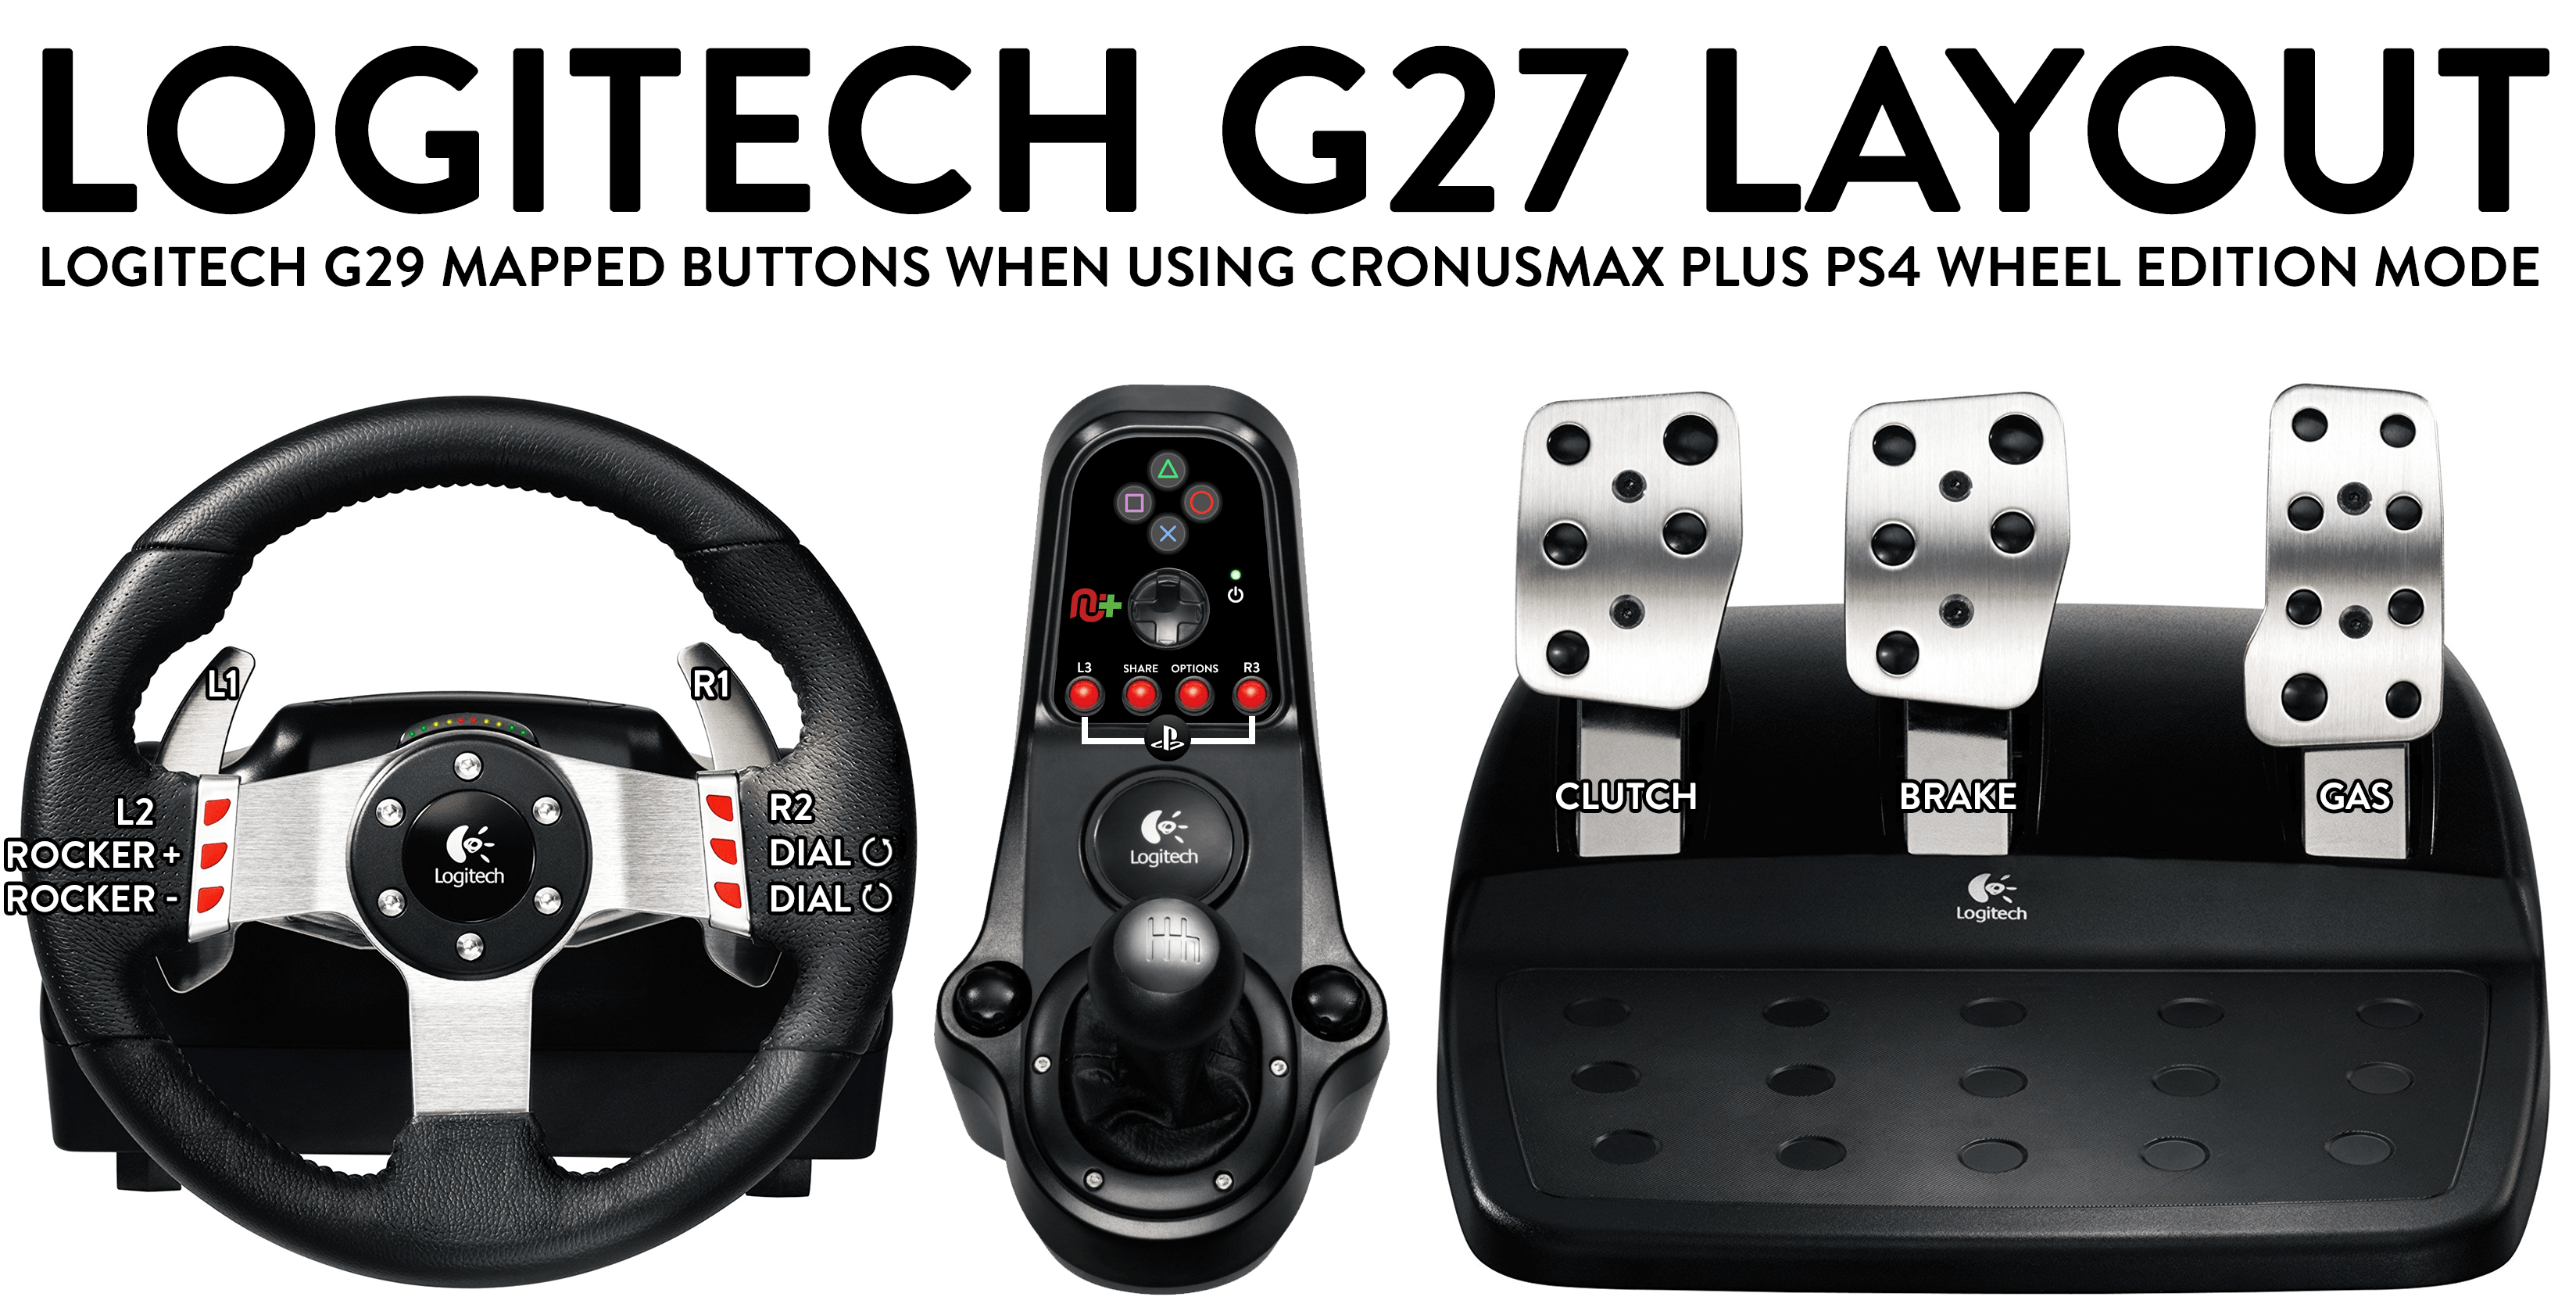 ps4 racing wheel with clutch and shifter